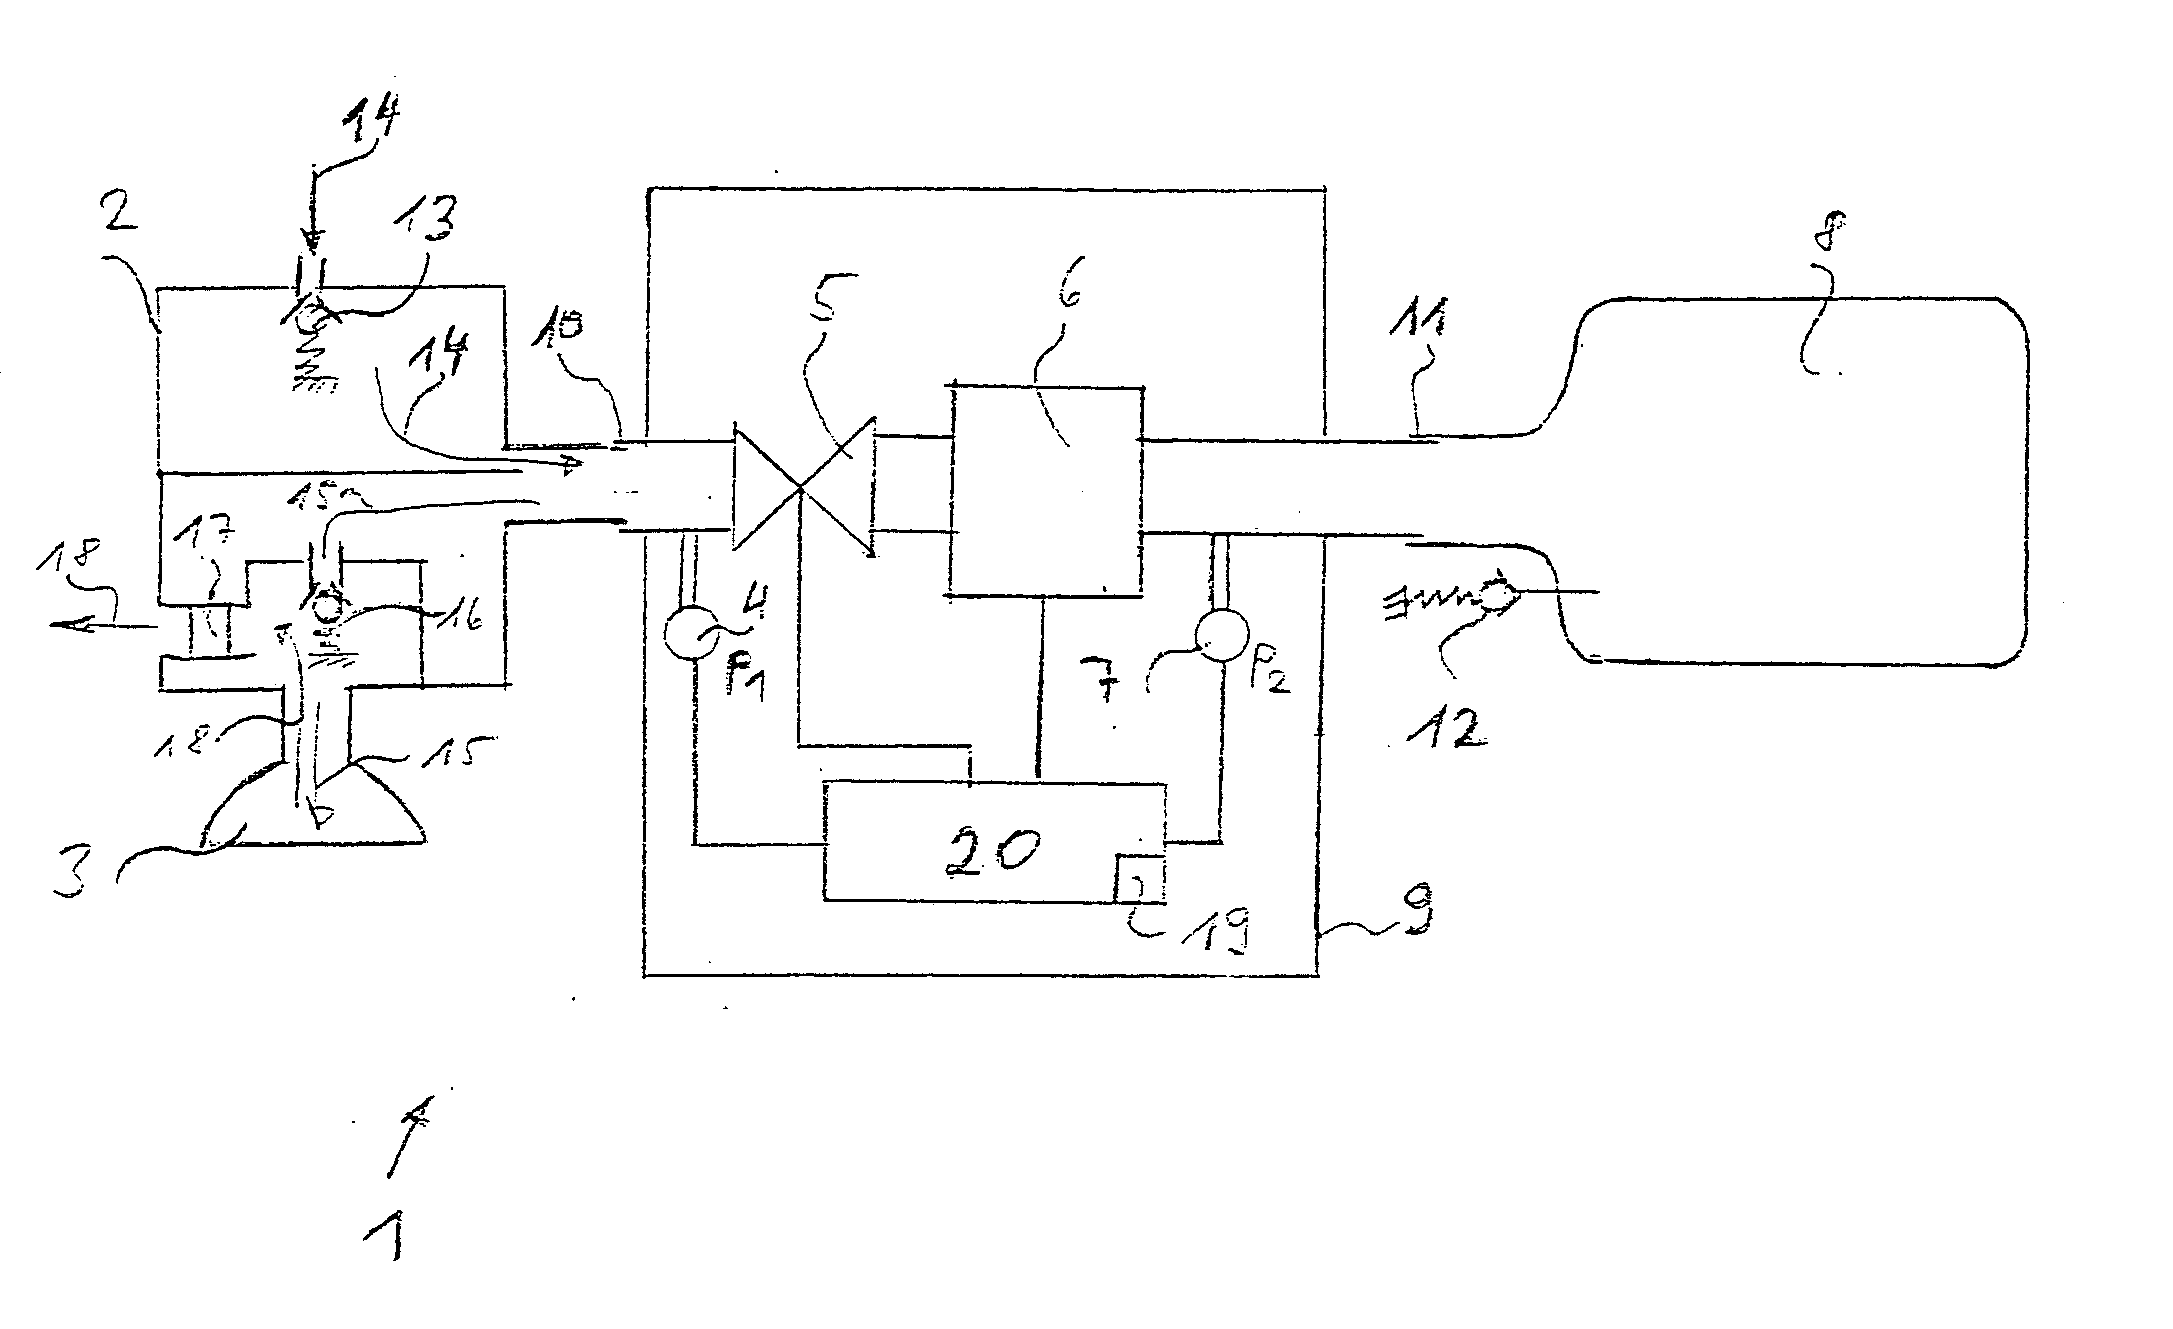 Device and process for metering breathing gas